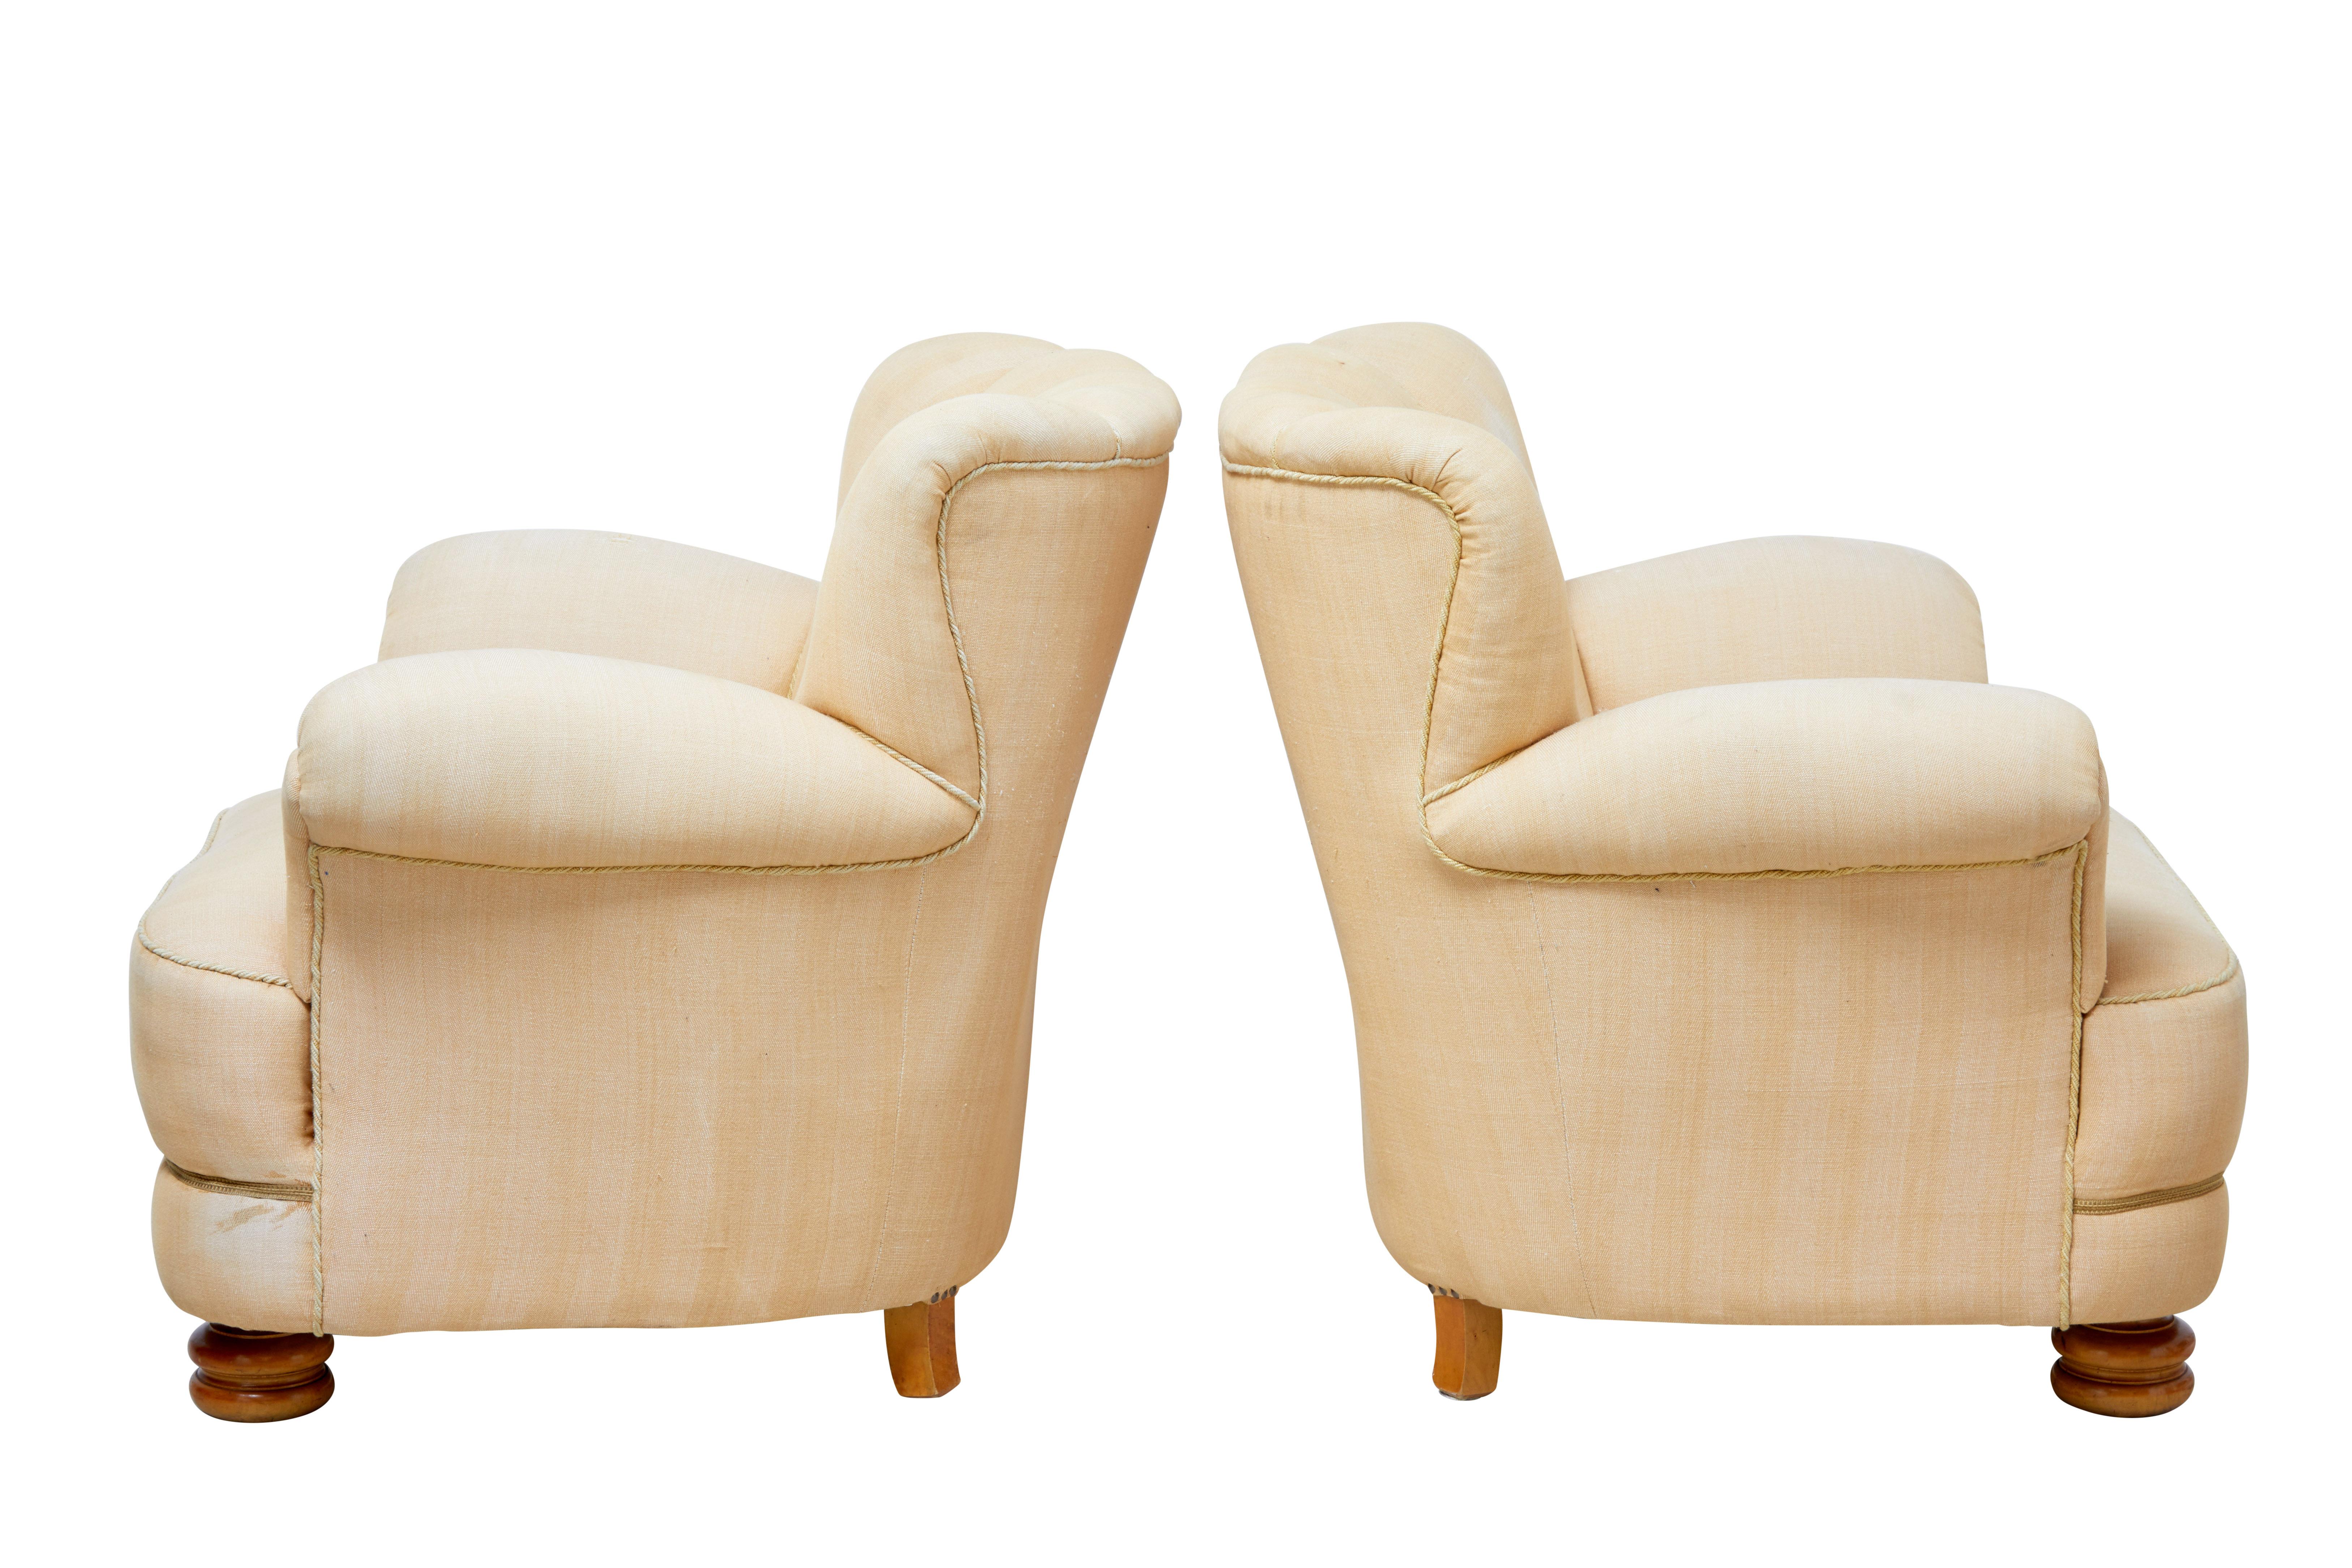 Pair of 1960s Scandinavian armchairs in the Art Deco taste.

Very comfortable pair of large armchairs, very much of Art Deco design.

Shaped shell backs with buttons and piping, roll top arms. A good deep and wide seat giving great